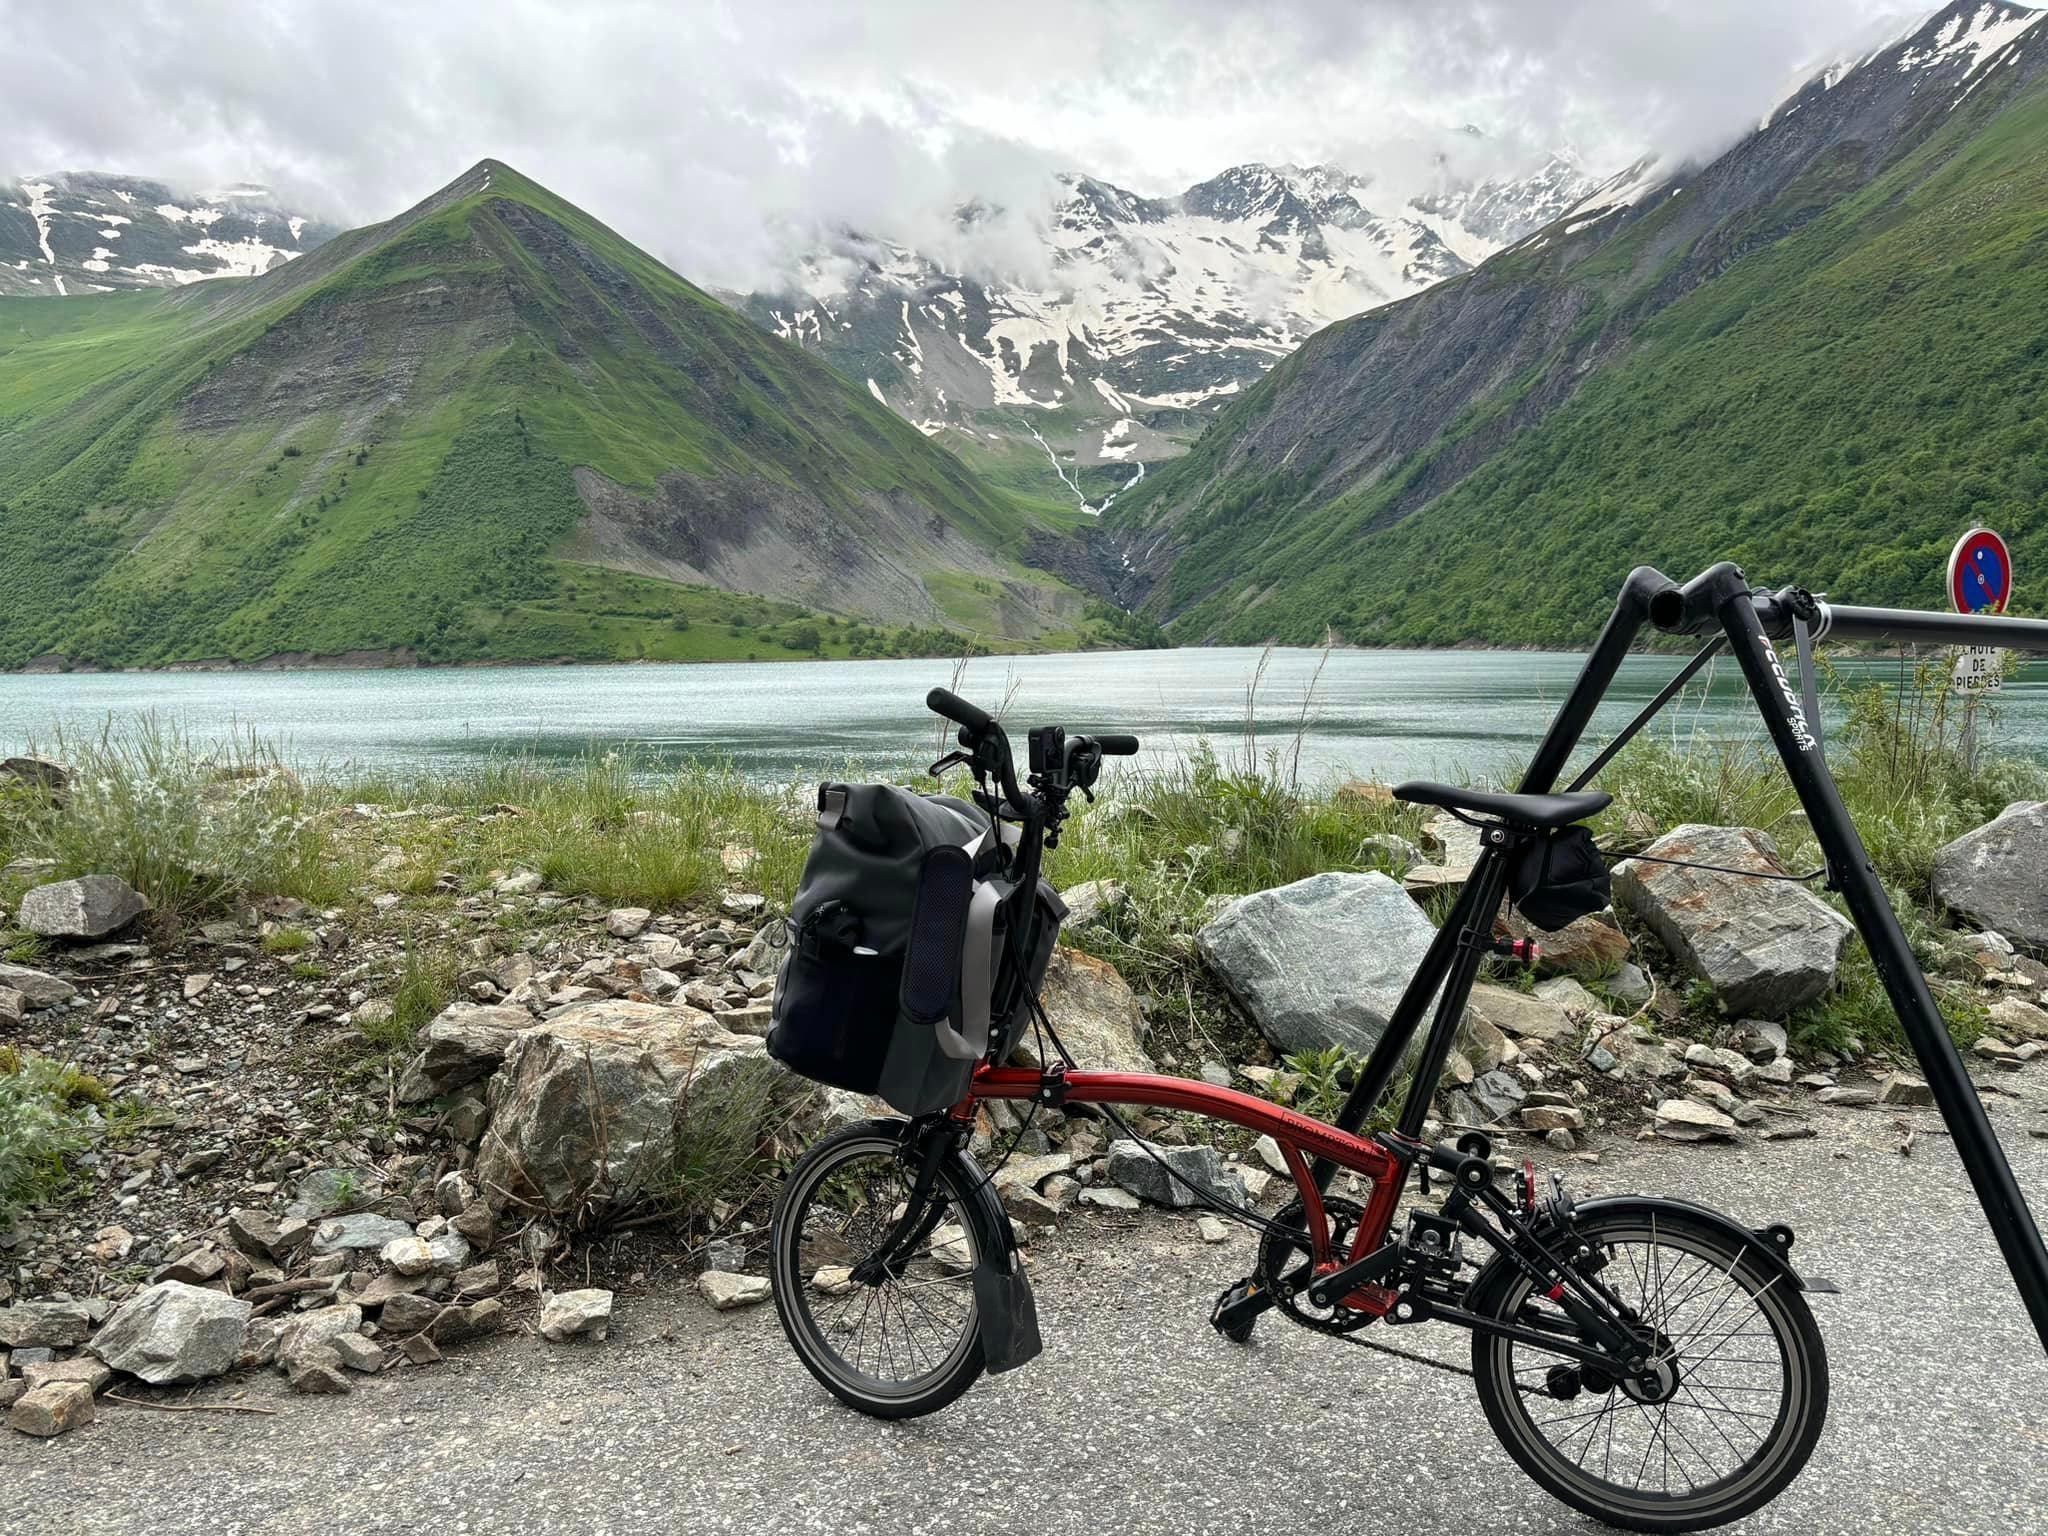 A foldable bike in front of a snowy mountain range